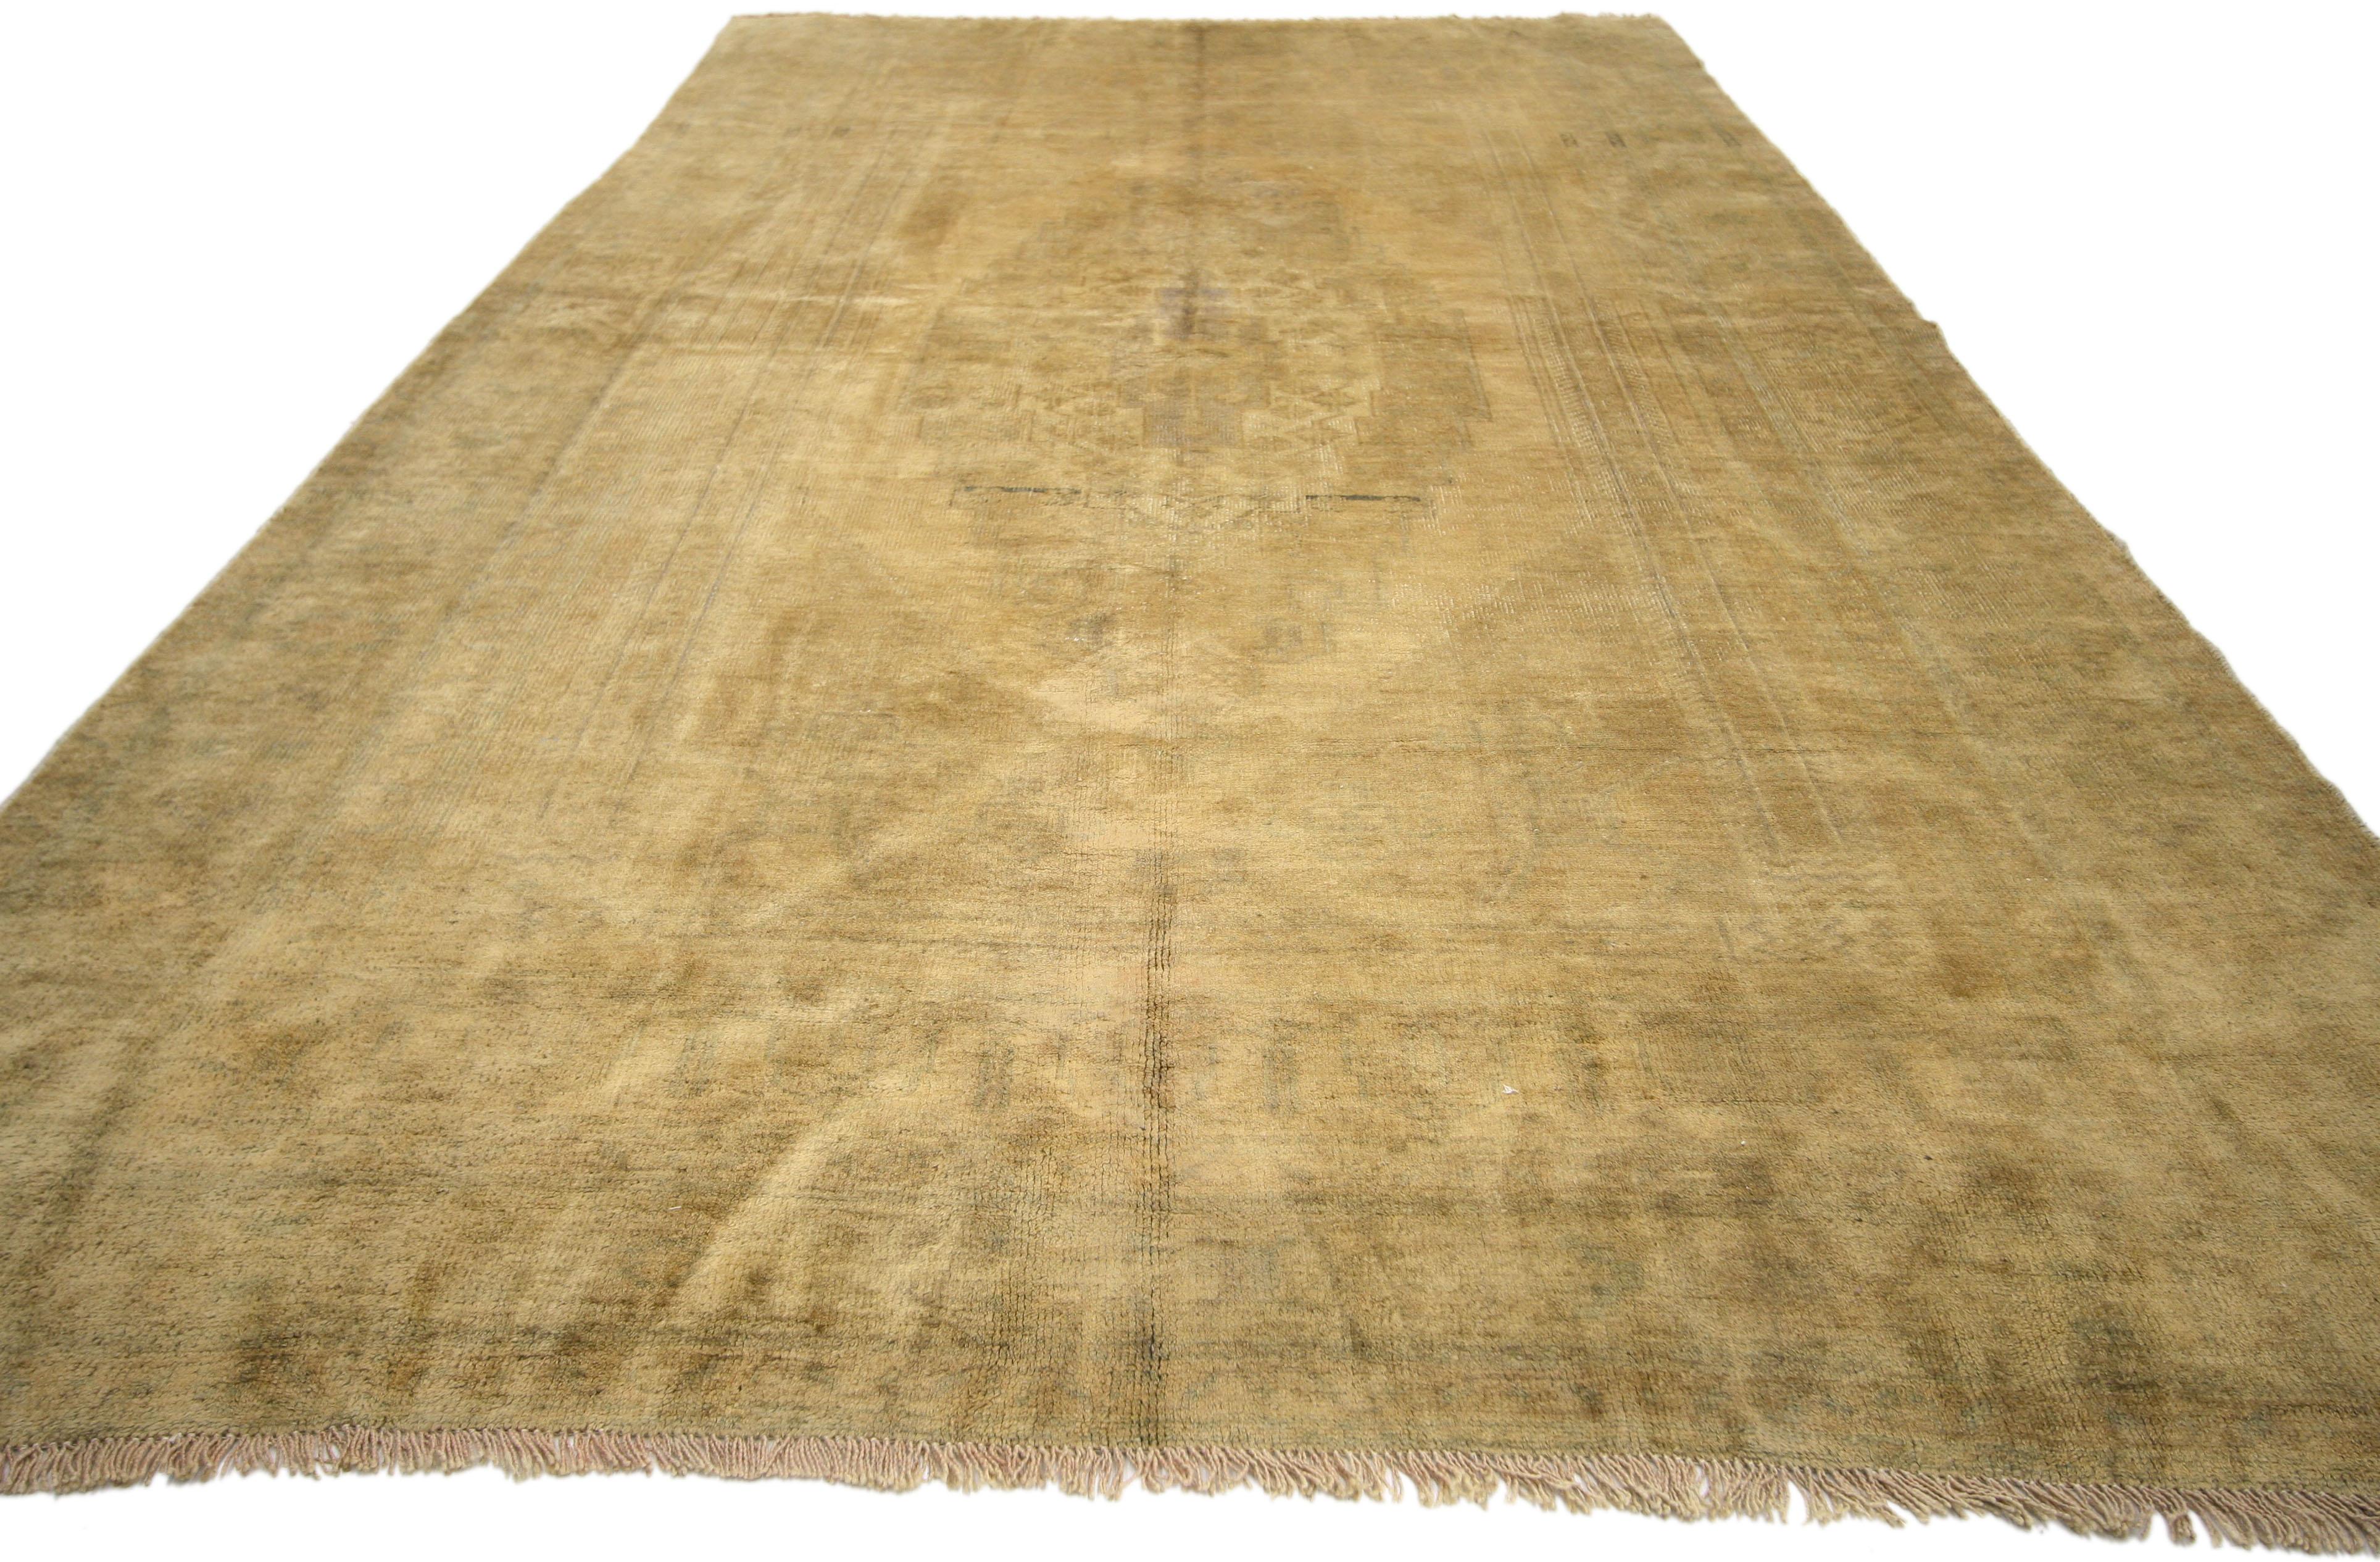 Hand-Knotted Vintage Turkish Oushak Gallery Rug with Amish Shaker Style in Earth-Tone Colors For Sale